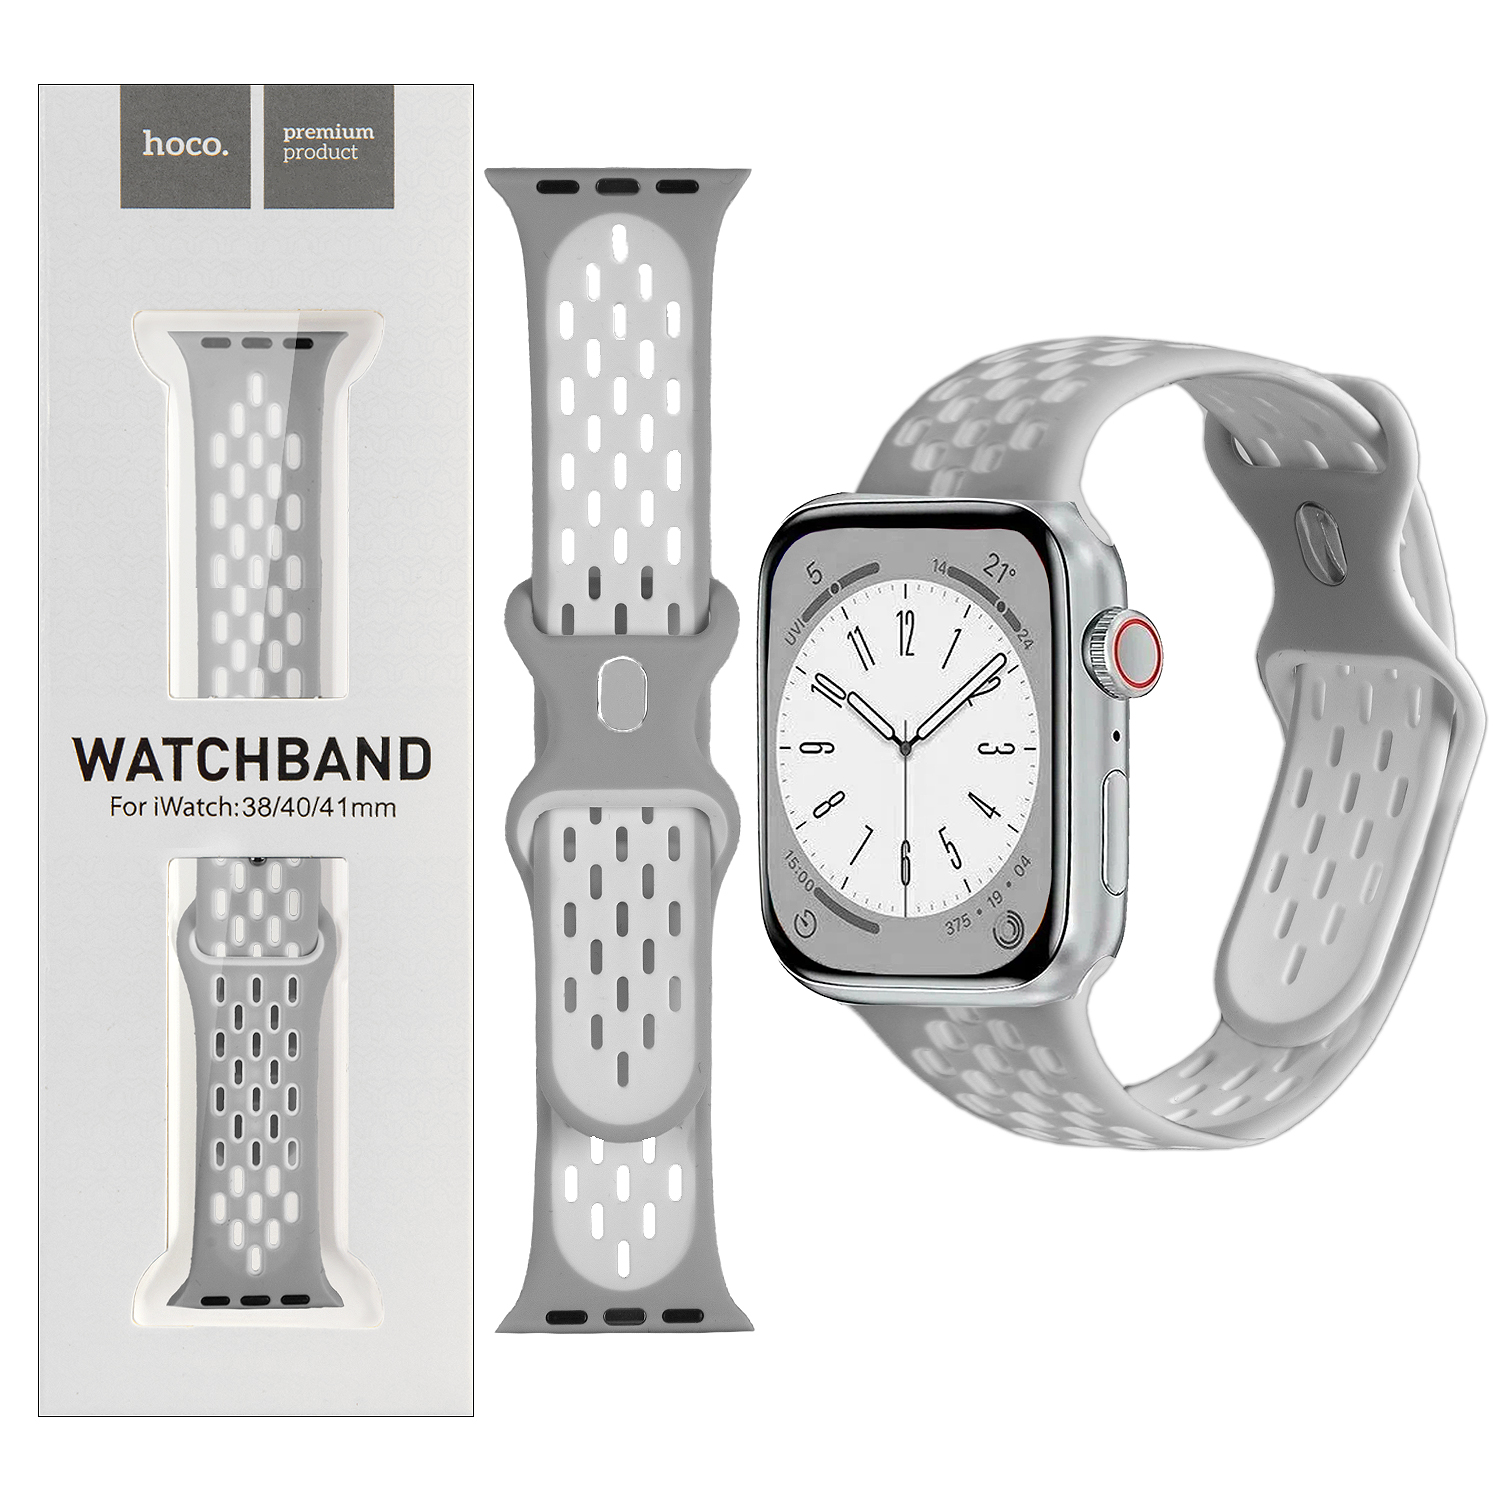 Ремешок для Apl watch 38/40/41mm Watchband WA19 pattern two-color silicone silver white HOCO